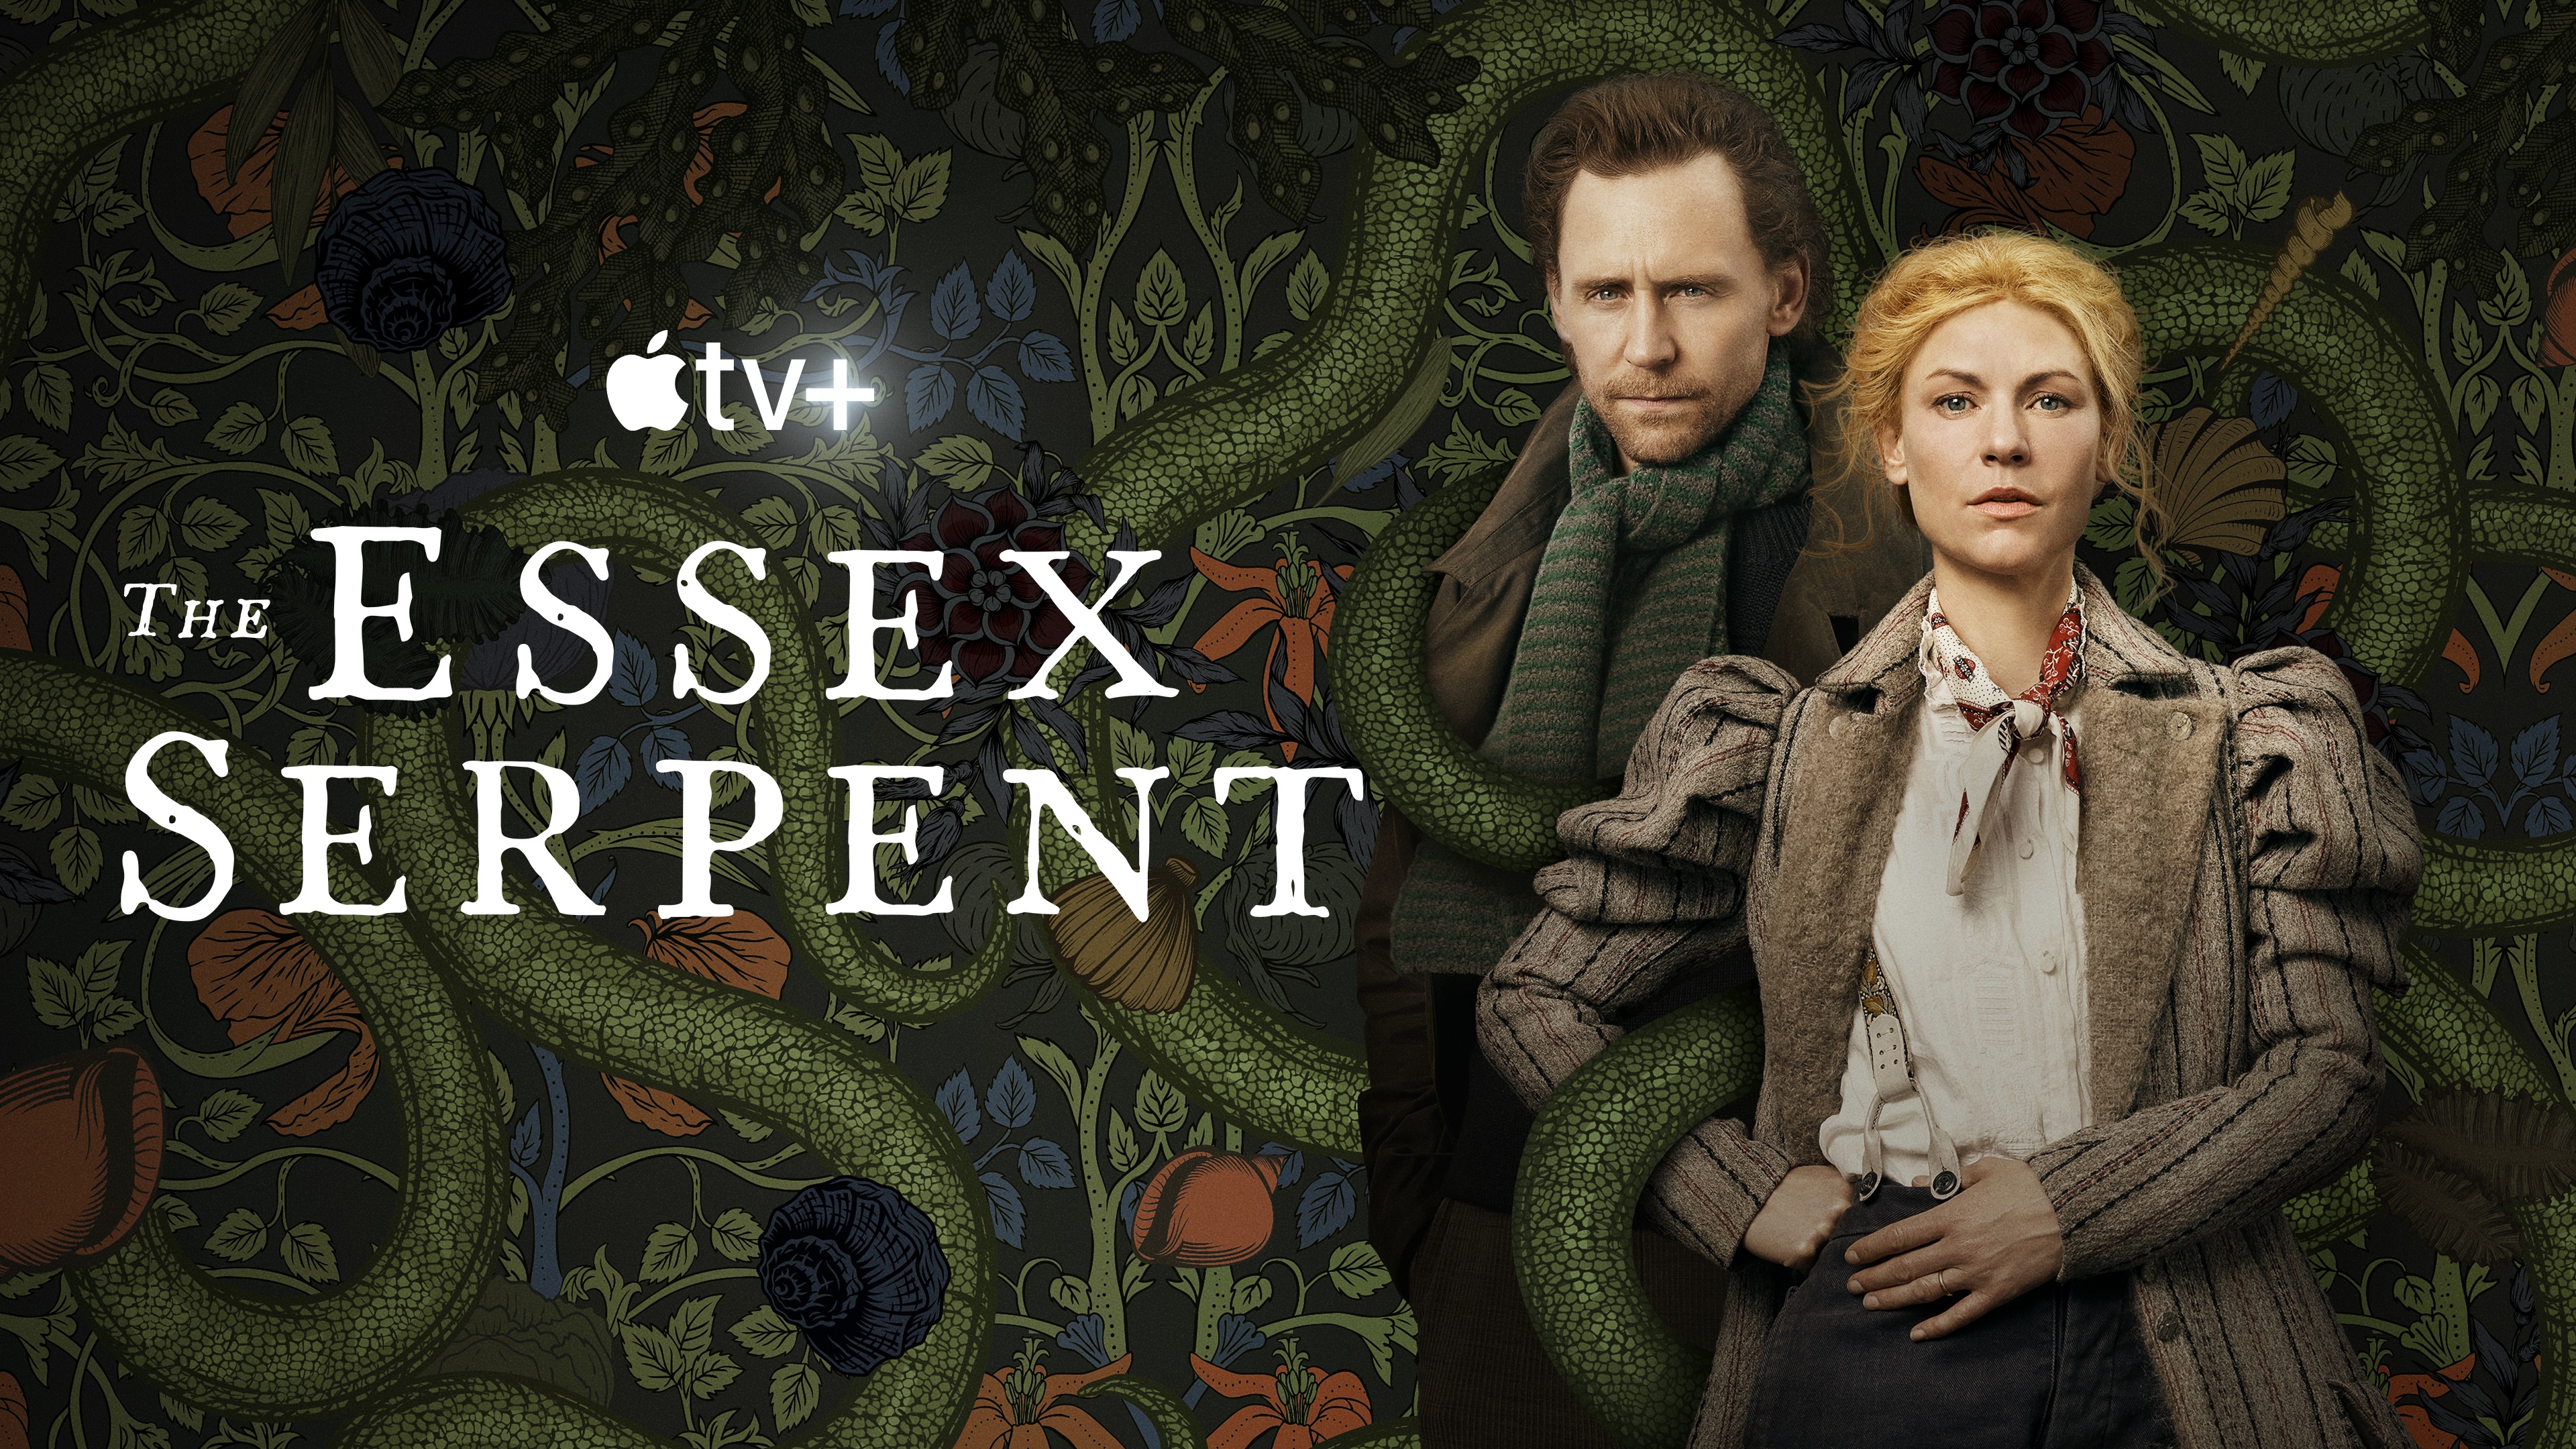 Claire Danes and Tom Hiddleston Stars in Apple TV+ “The Essex Serpent” 